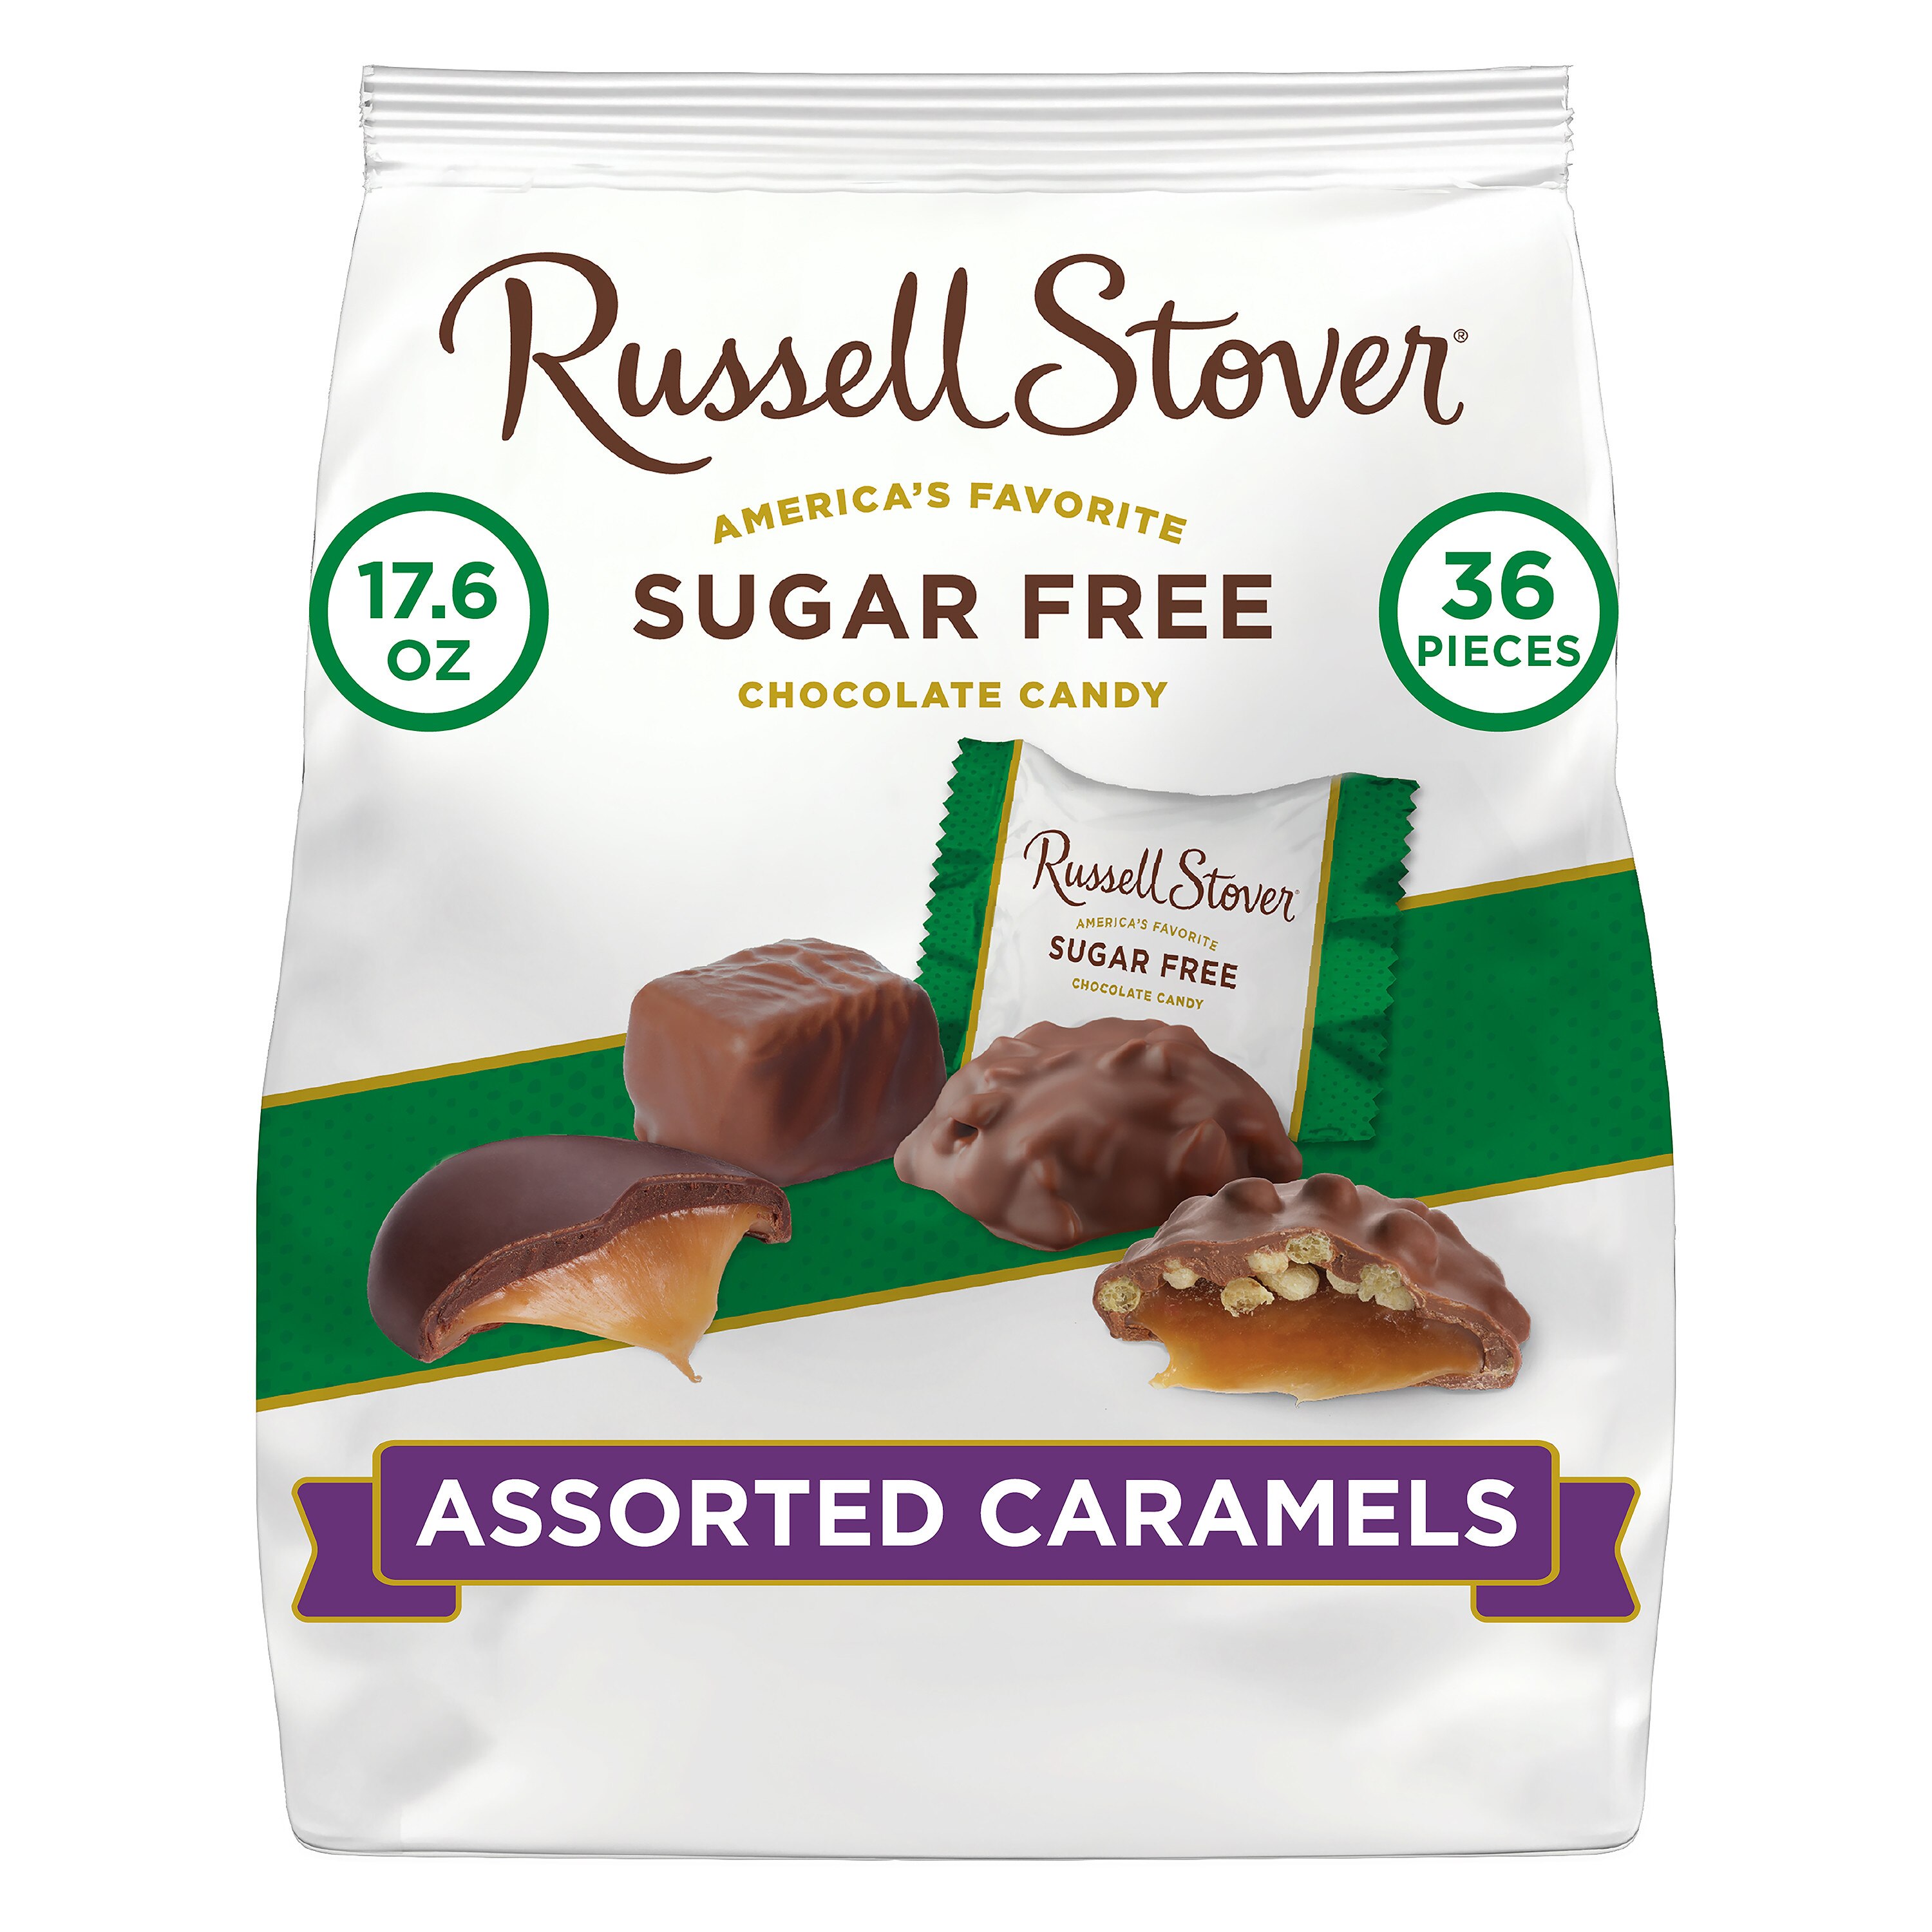 Russell Stover Sugar Free Assorted Chocolate Caramels, 17.6 oz